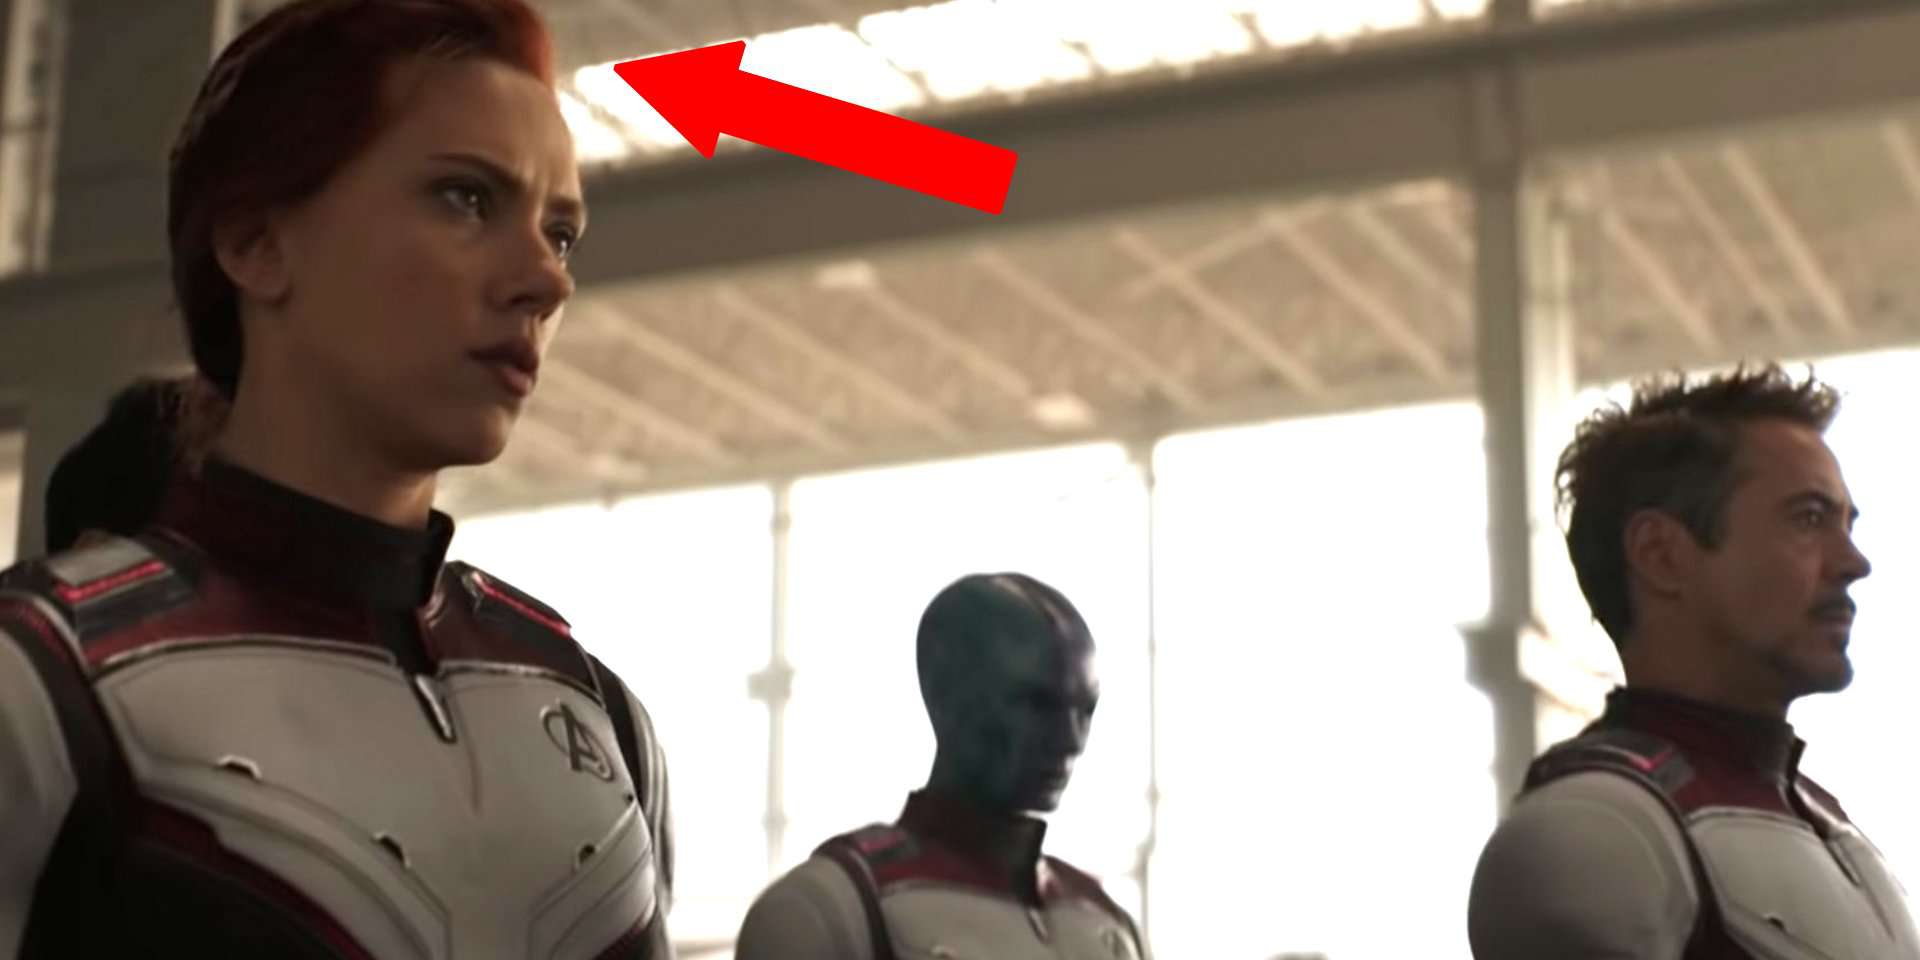 Taboola Ad Example 65112 - Everything You Missed In The “Avengers: Endgame” Trailer